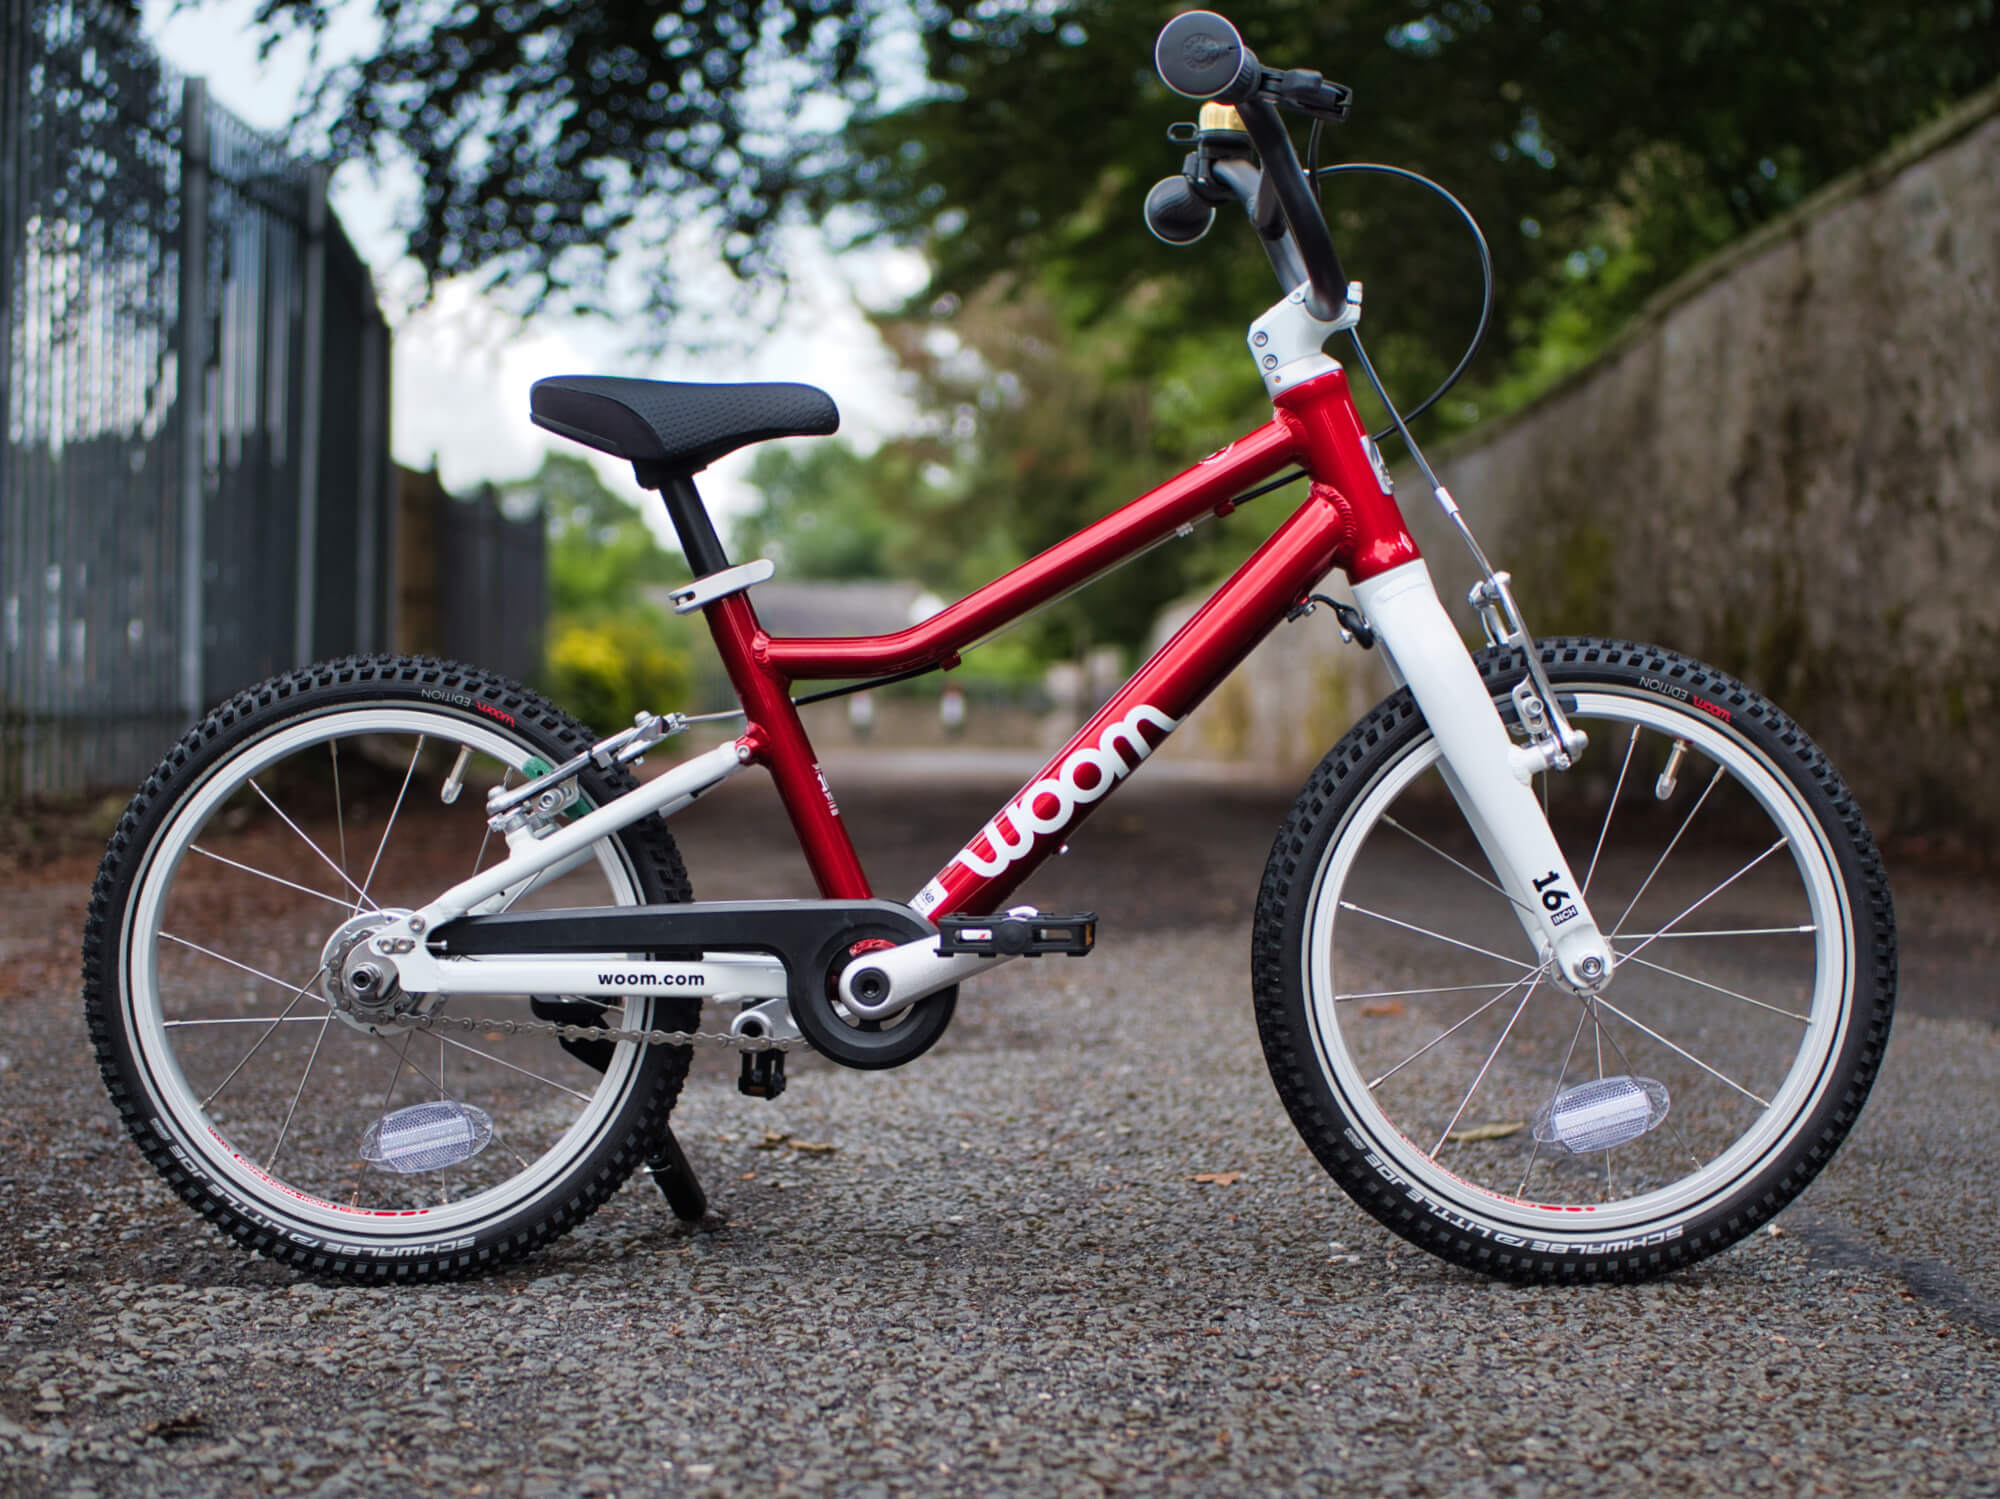 Are woom bikes good first pedal bikes?